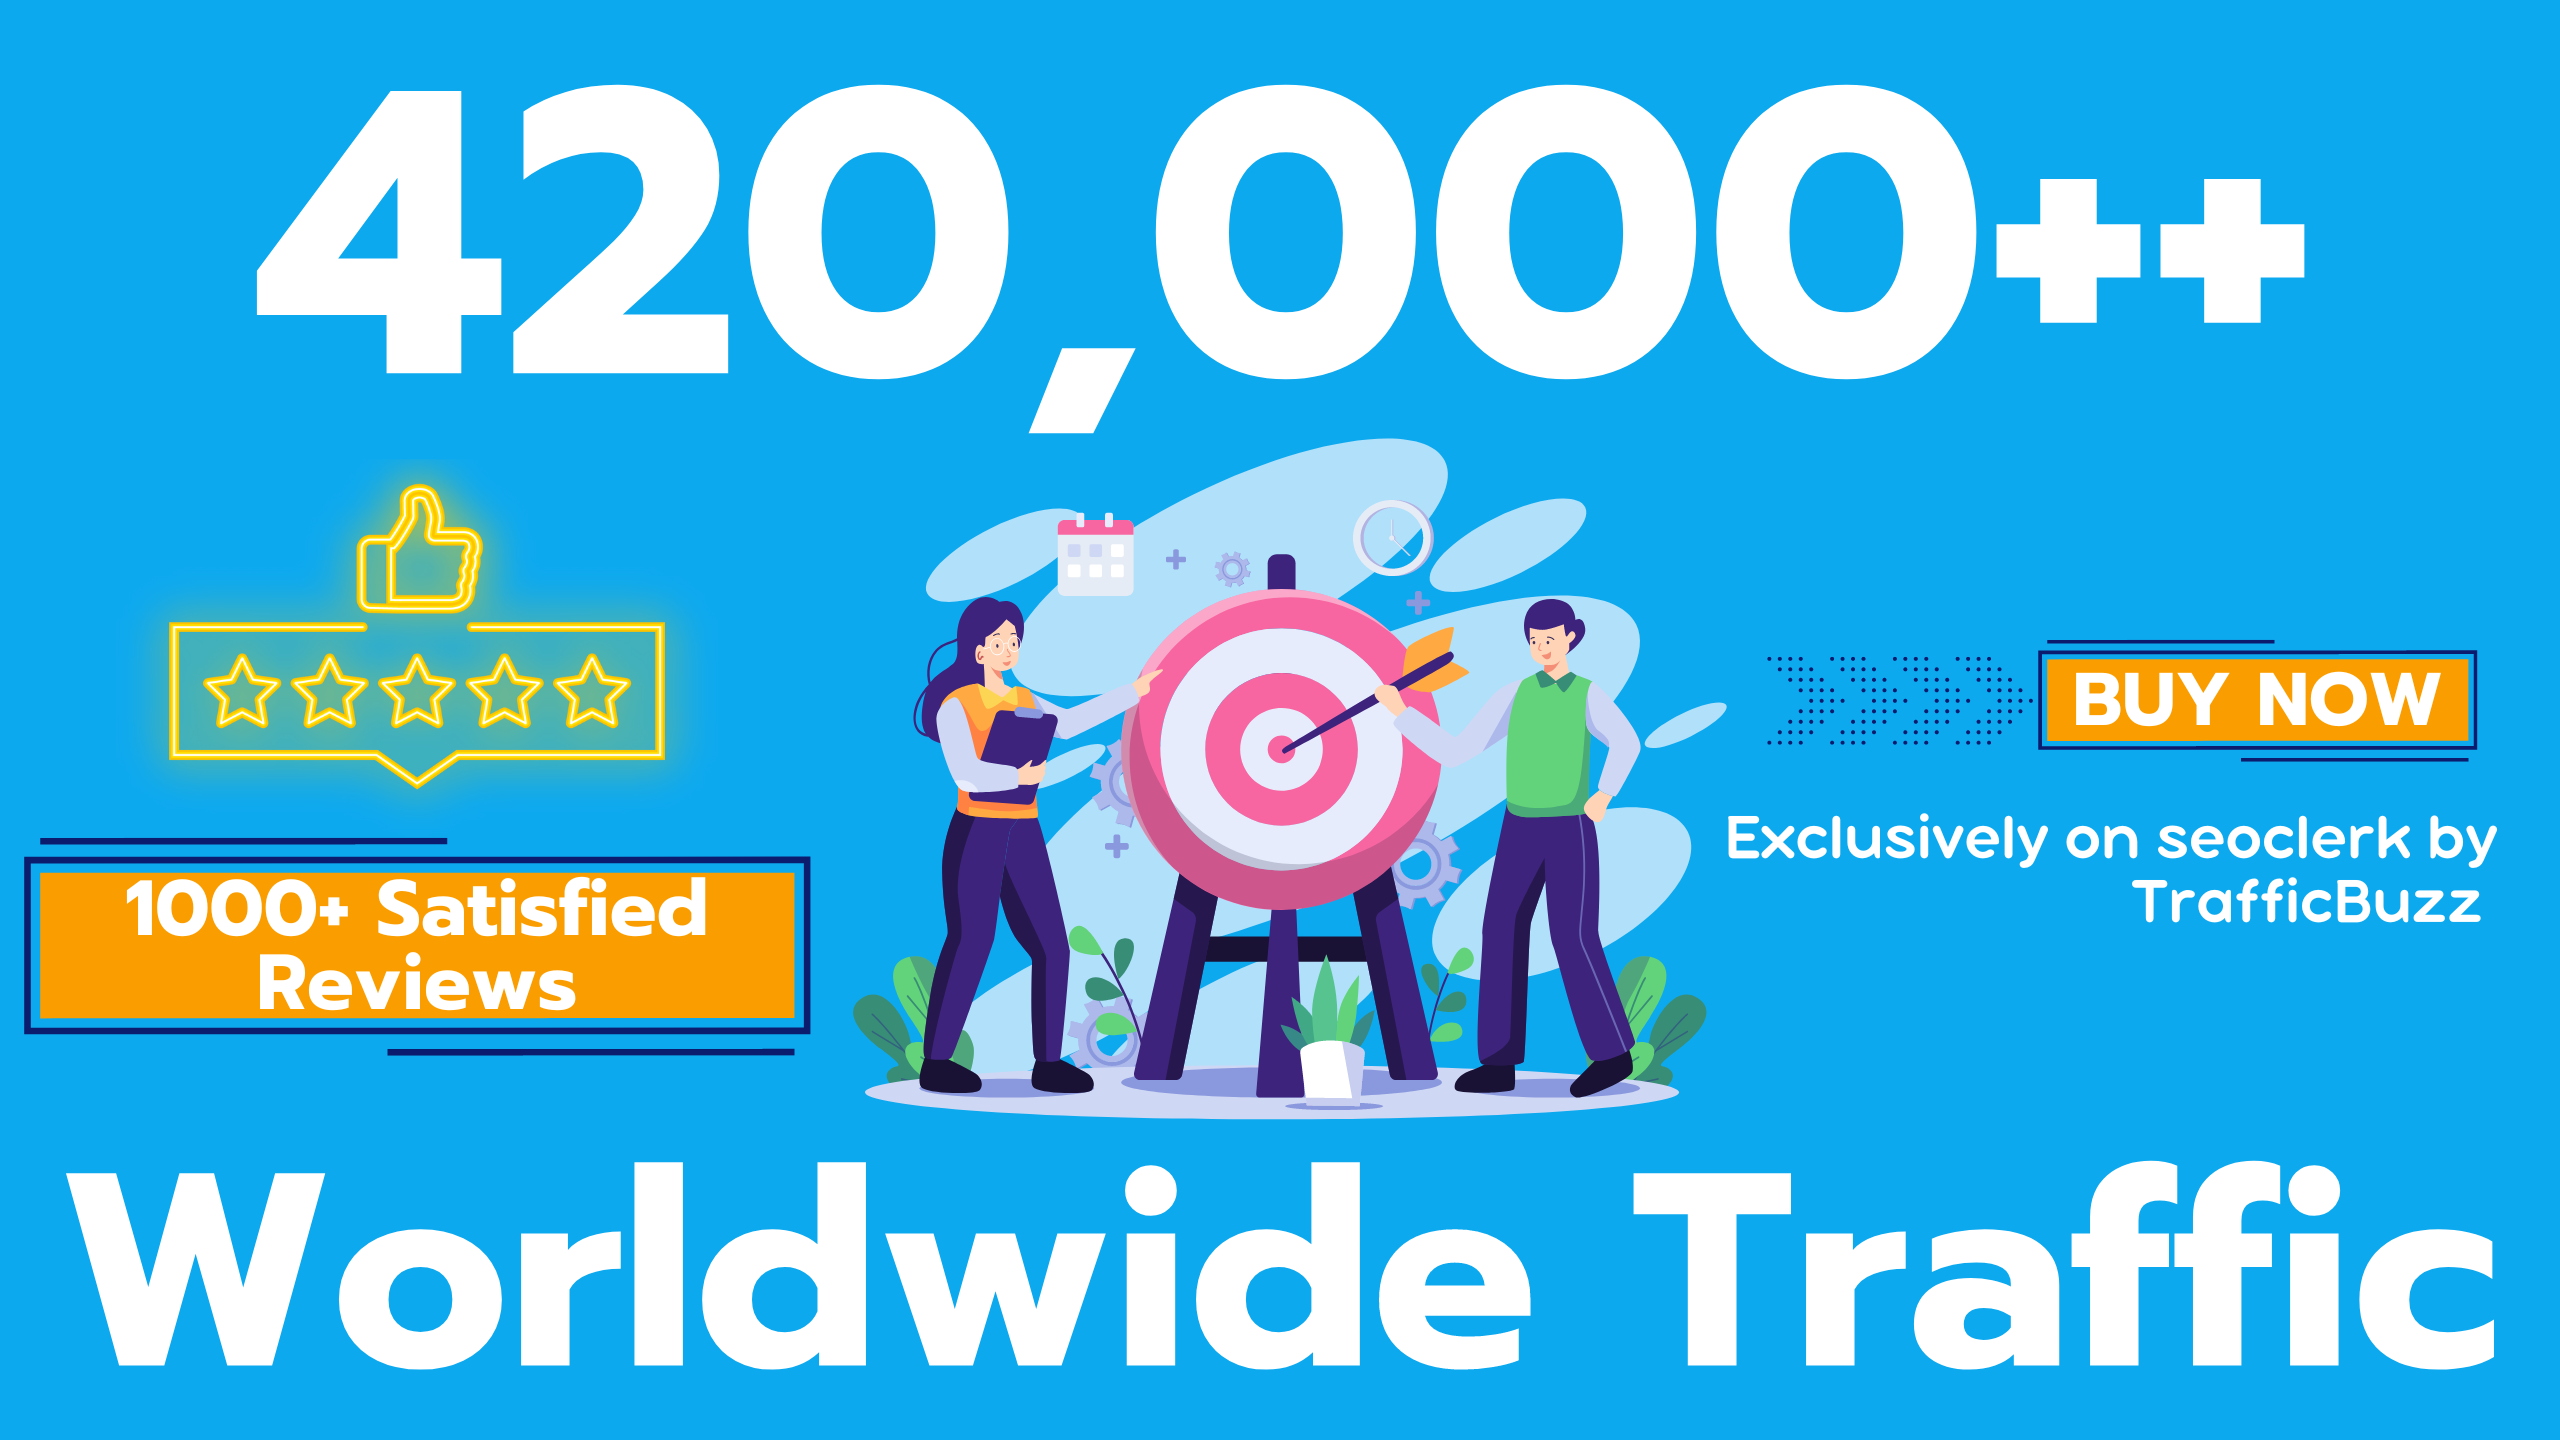 Drive 420,000 + Targeted Human Traffic from search engine and social media